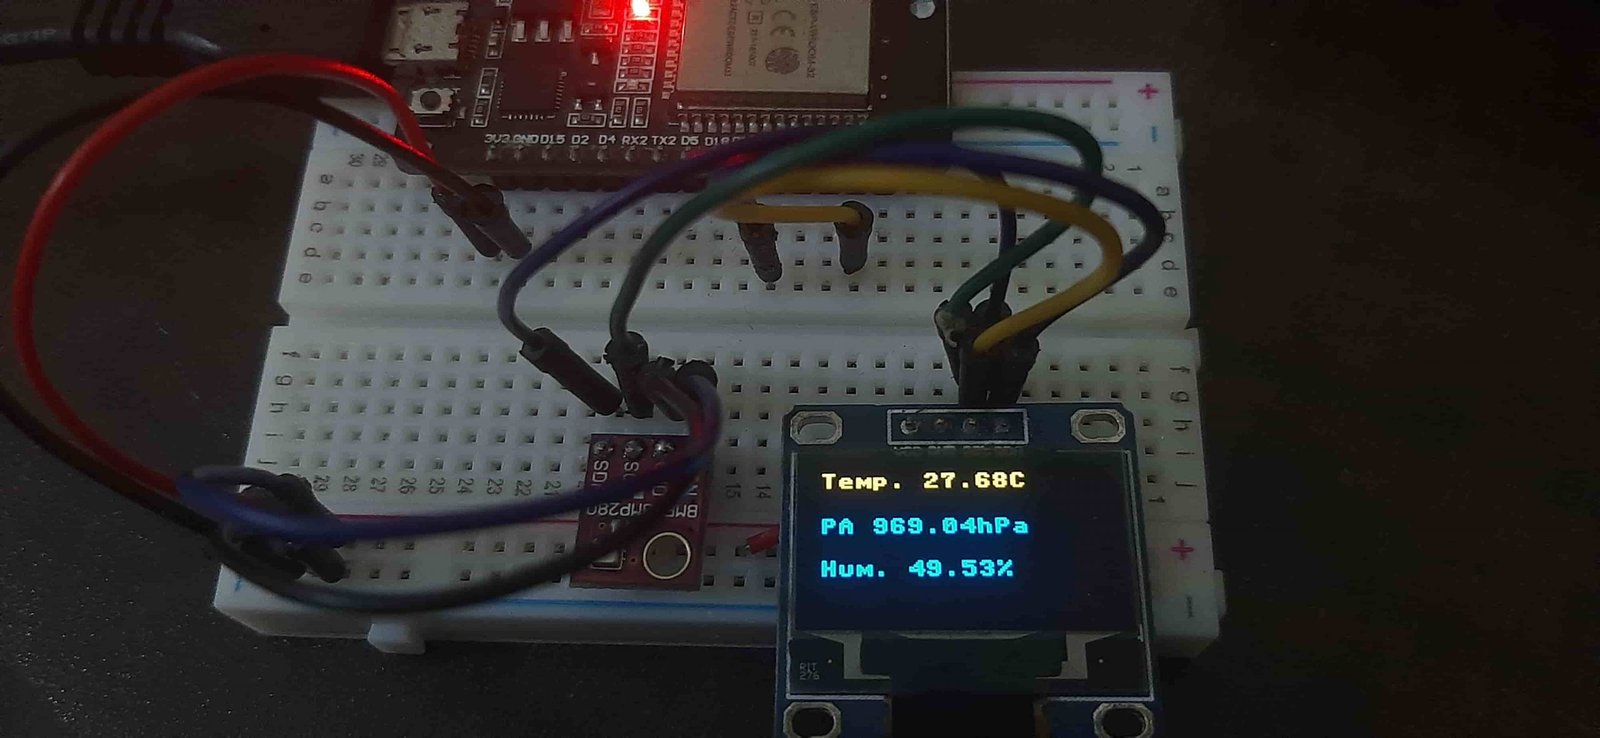 bme280 with esp32 esp8266 and oled demo